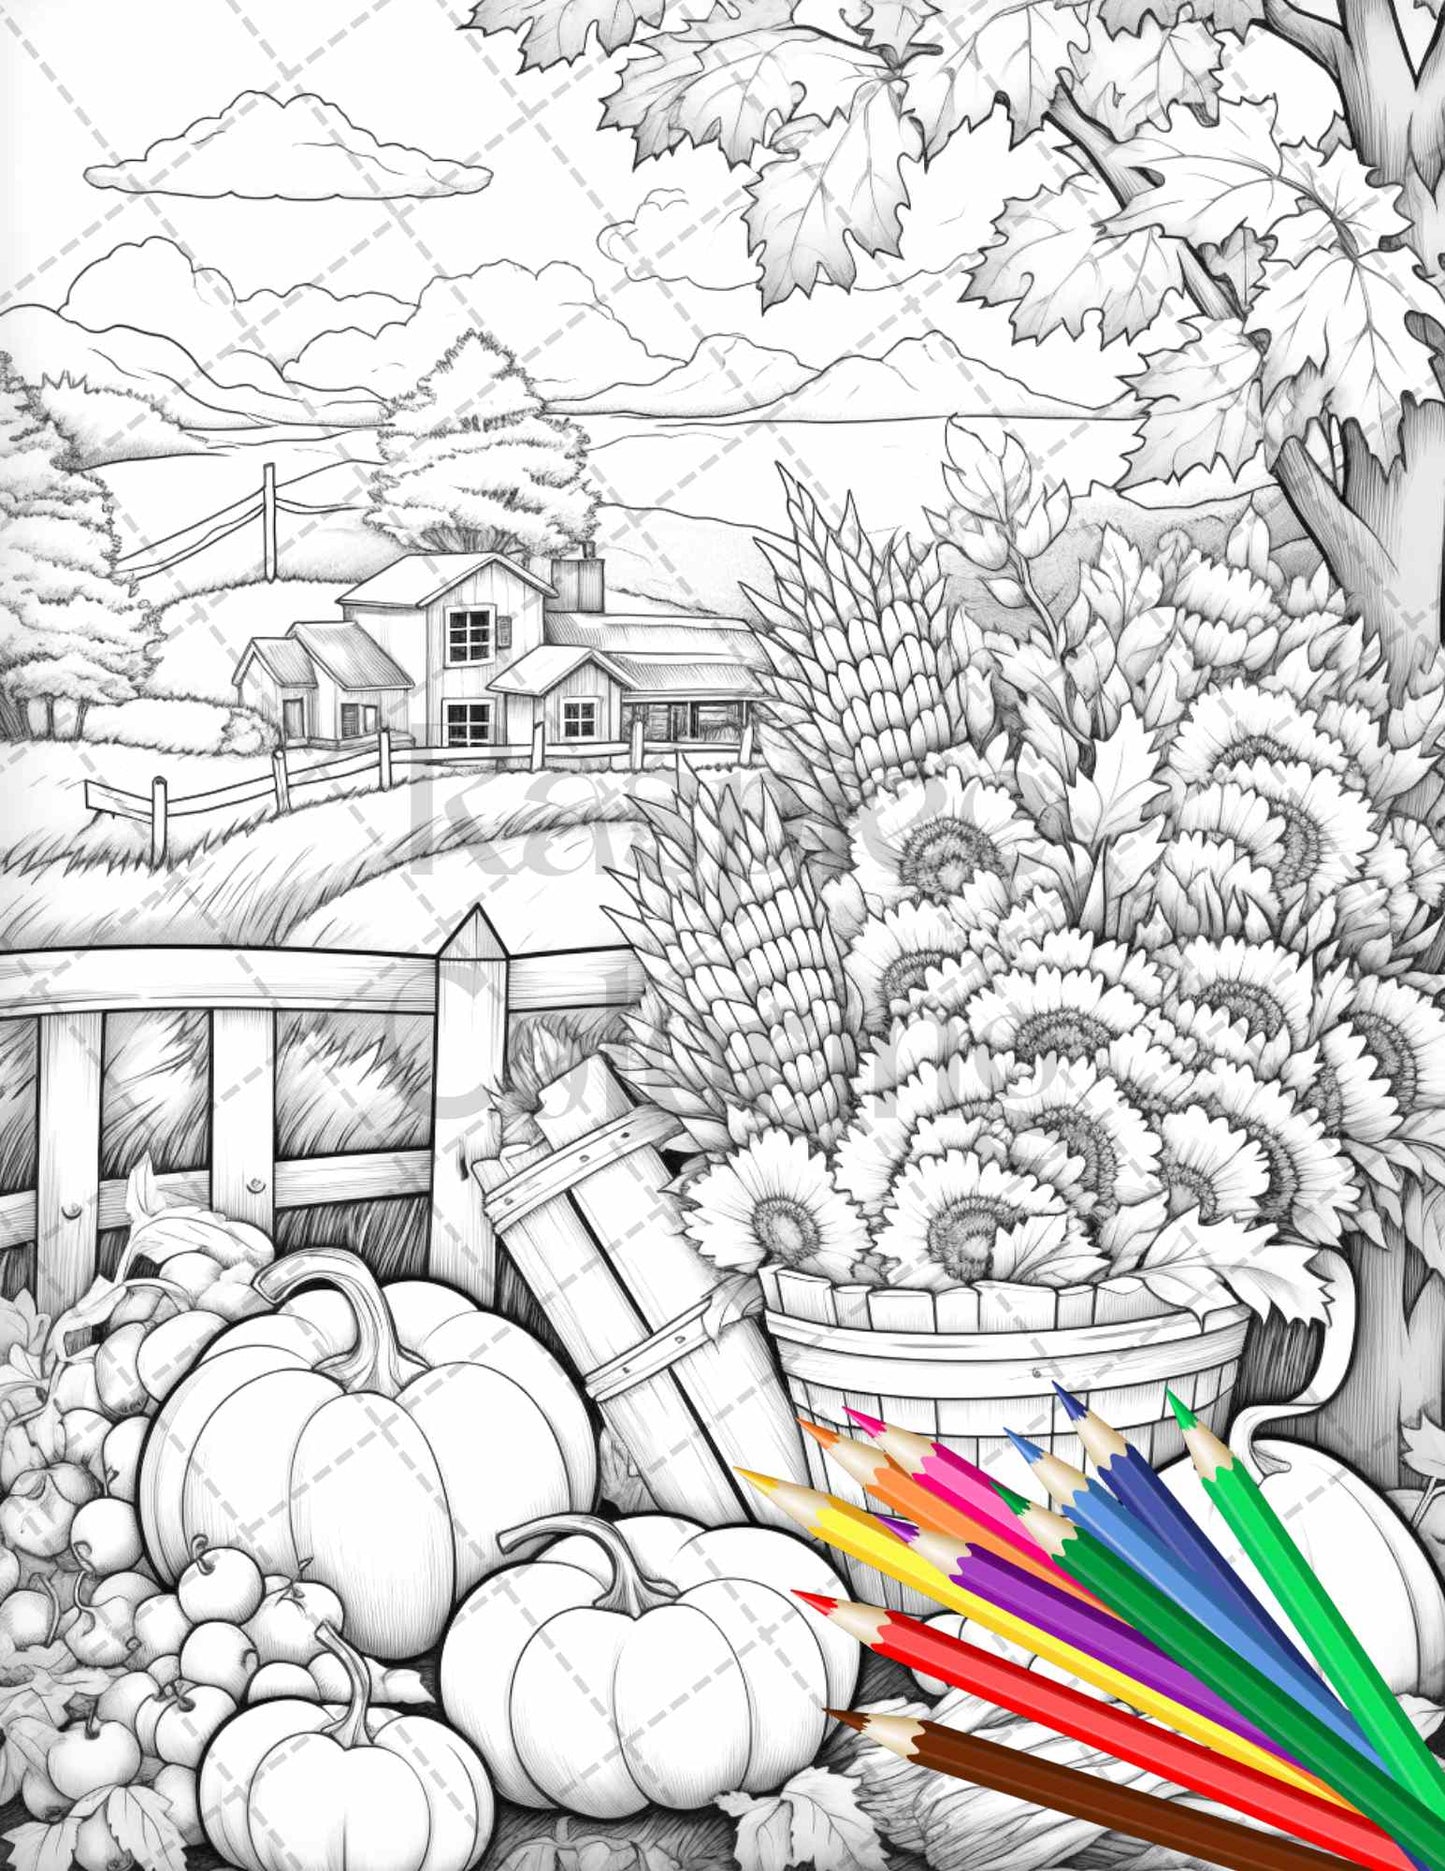 Autumn Harvest Grayscale Coloring Page for Adults, Fall-Themed Printable Coloring Art for Stress Relief, Autumn Coloring Pages for Adults, Fall Coloring Pages for Adults